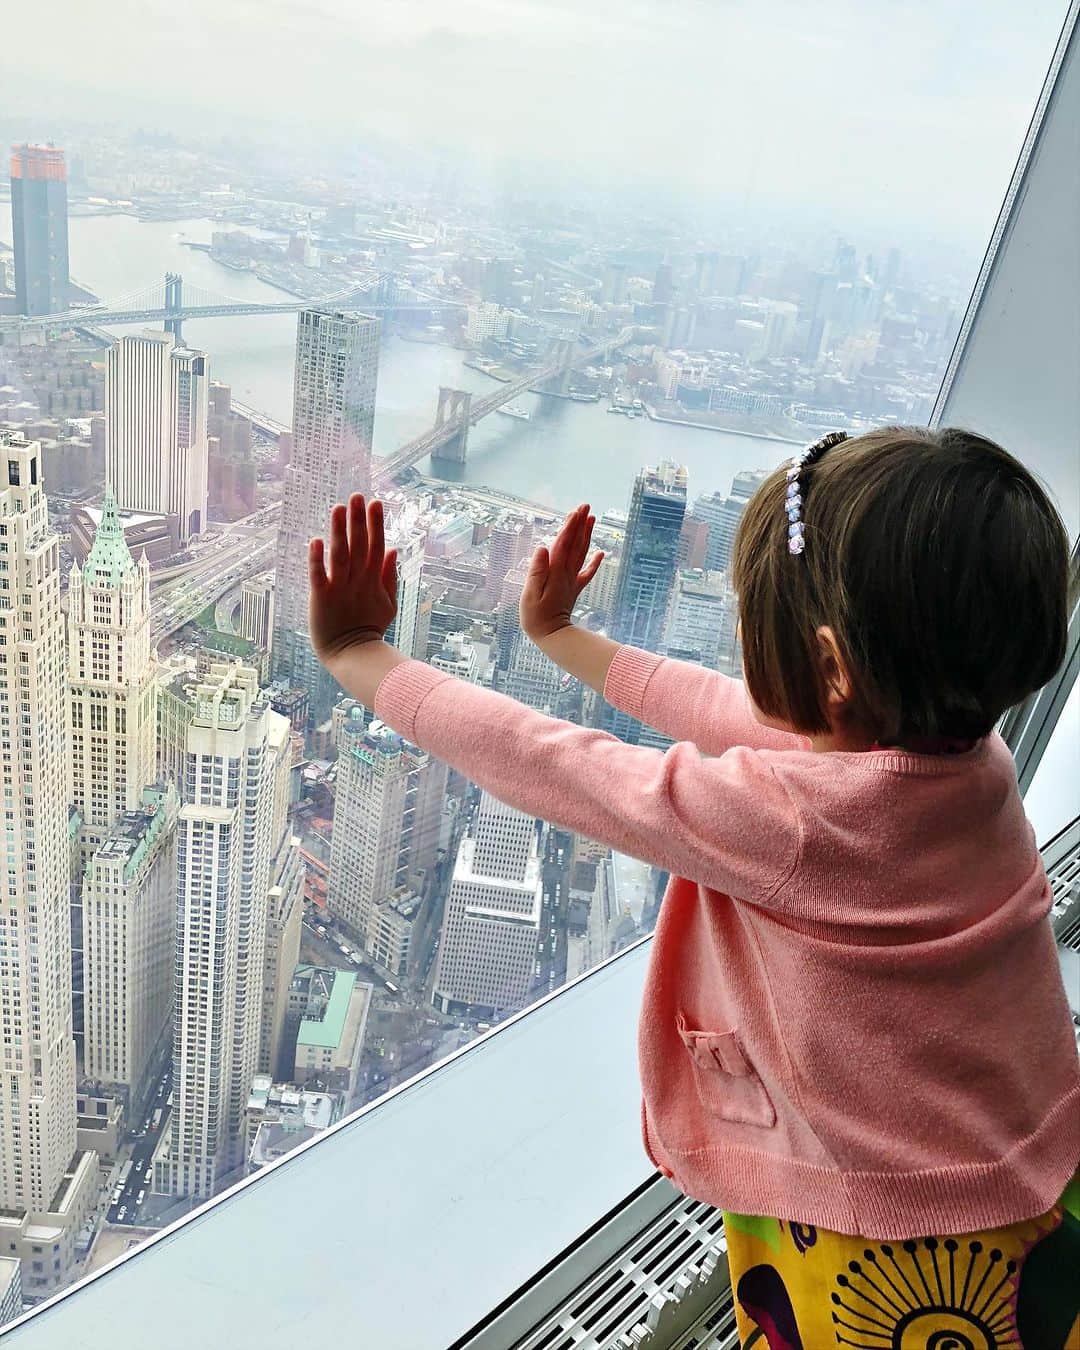 Ilana Wilesさんのインスタグラム写真 - (Ilana WilesInstagram)「Everyone always asks me where they should go in NYC for the best view, so here are my reviews of the most popular vantage points. Photos 1-3: One Vanderbilt is my vote for the best view of NYC. It has the best view of the Empire State Building and the Chrysler Building, which you can find on the east side of the building. It’s also got several ways to see the view— the mirror room, the glass box, the glass elevator, etc so there is a lot to do once you get to the top. Photos 4-5: We loved going to the top of the Empire State Building, especially since there is a ton of NYC nostalgia in their newly built museum. We also spent the extra money to go to the top of the spire, which felt super special because only a few people can go to the very top at a time. But you know what the view is missing? The Empire State Building. Photos 6-7: Top of the Rock is the quintessential view of the city (a view that you’ll recognize from a lot of movies), with the iconic viewfinders, and I love that you can see both the Southern view of the city with the ESB and the northern view which includes Central Park, but the “experience” to get to the top feels like it needs an update. Photos 8-9: The Edge is cool with its triangular glass balcony, and if you are willing to wait in line for the corner shot, you will get a great photo, but you can’t see a lot of the iconic NYC buildings from that vantage point on the west side. Photo 10) One World Trade is the highest vantage point in the city, and you see all of the Island of Manhattan sprawling out before you, with an up-close view of the downtown skyline and the ESB in the distance. Its also got a great view of all the bridges. It was cloudy the day we went so i didn’t get the best pictures. But the part that really got me was the film that plays once you reach the top. It’s about the strength of New Yorkers and our ability to rebuild and then ends with revealing the view. Took my breath away!」10月5日 3時38分 - mommyshorts